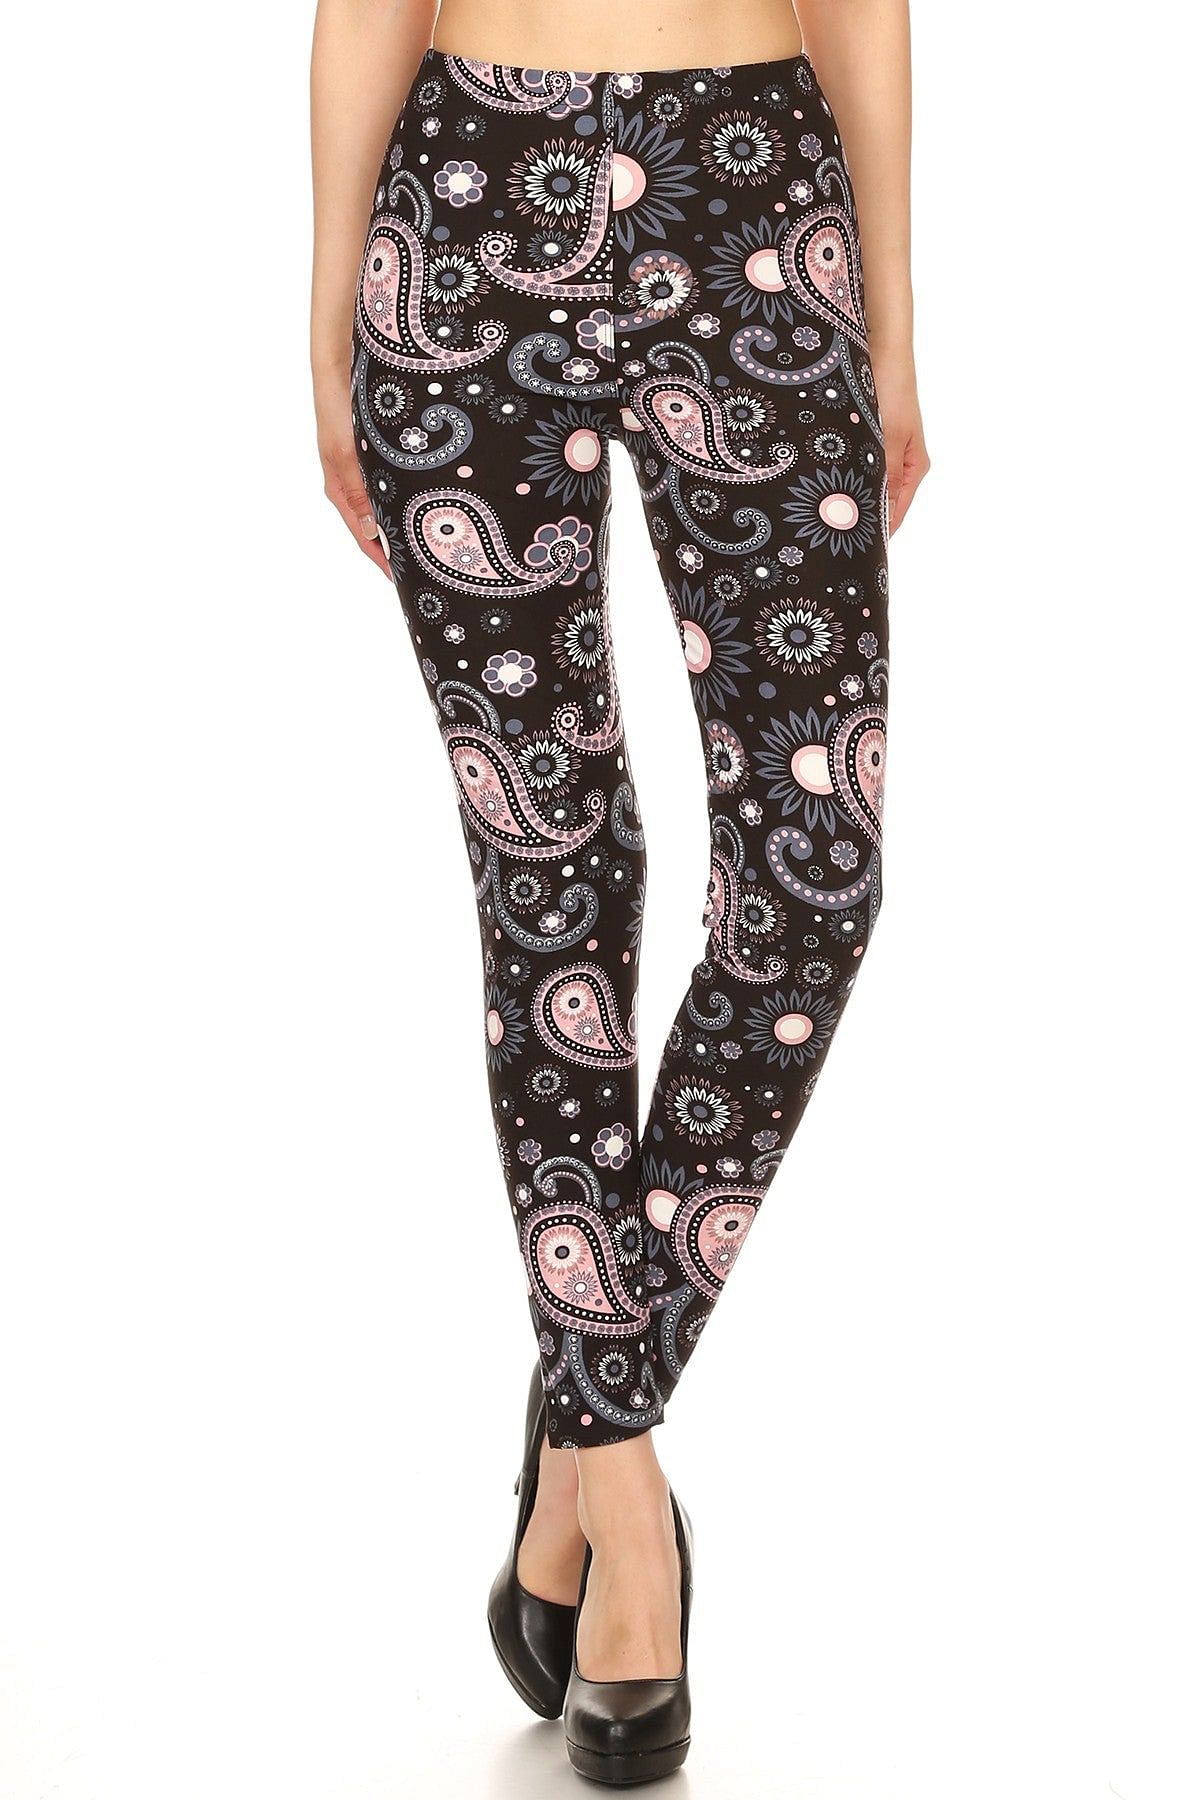 Buttery Smooth Monochrome Floral Paisley Extra Plus Size Leggings - 3X-5X